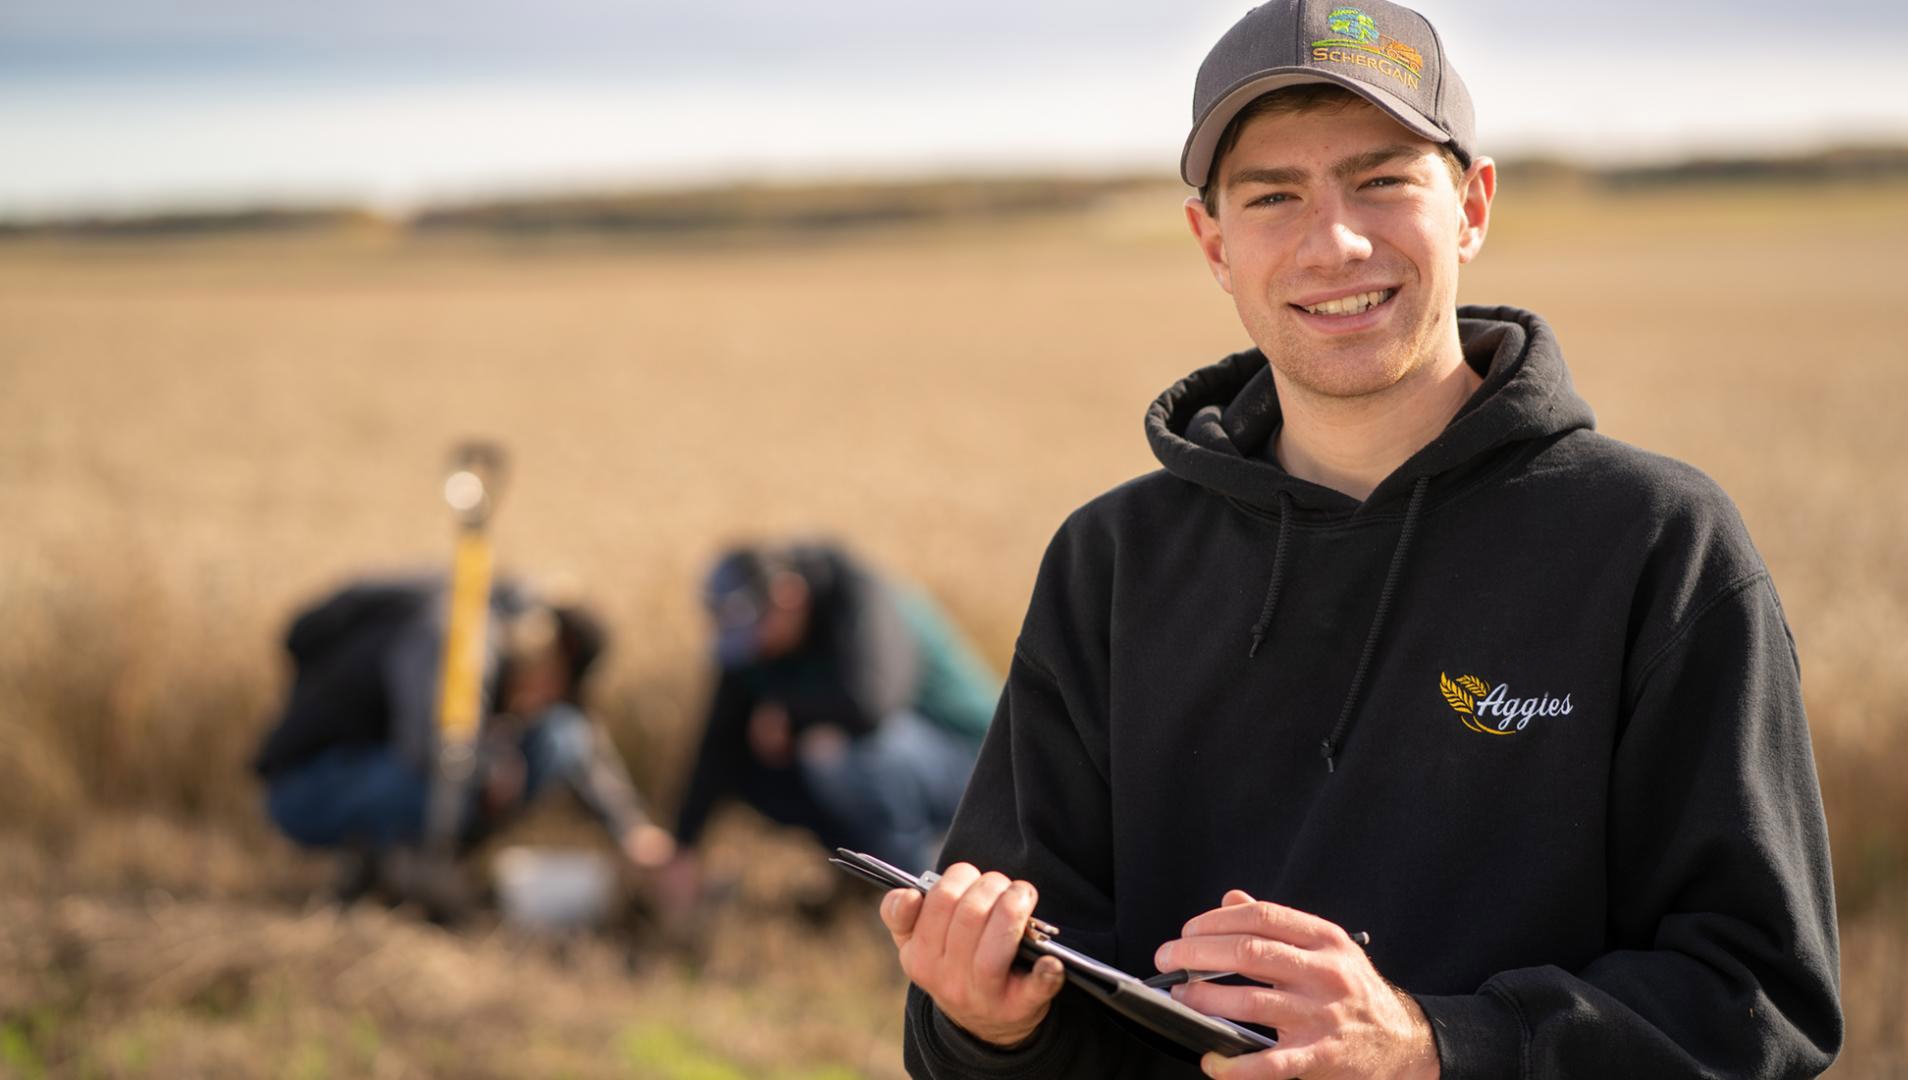 On the right side of the picture a male agribusiness student wearing a grey cap and black hoodie is holding a clipboard and smiling at the camera. In the background there is a wheat field and two other students are looking at something on the ground.